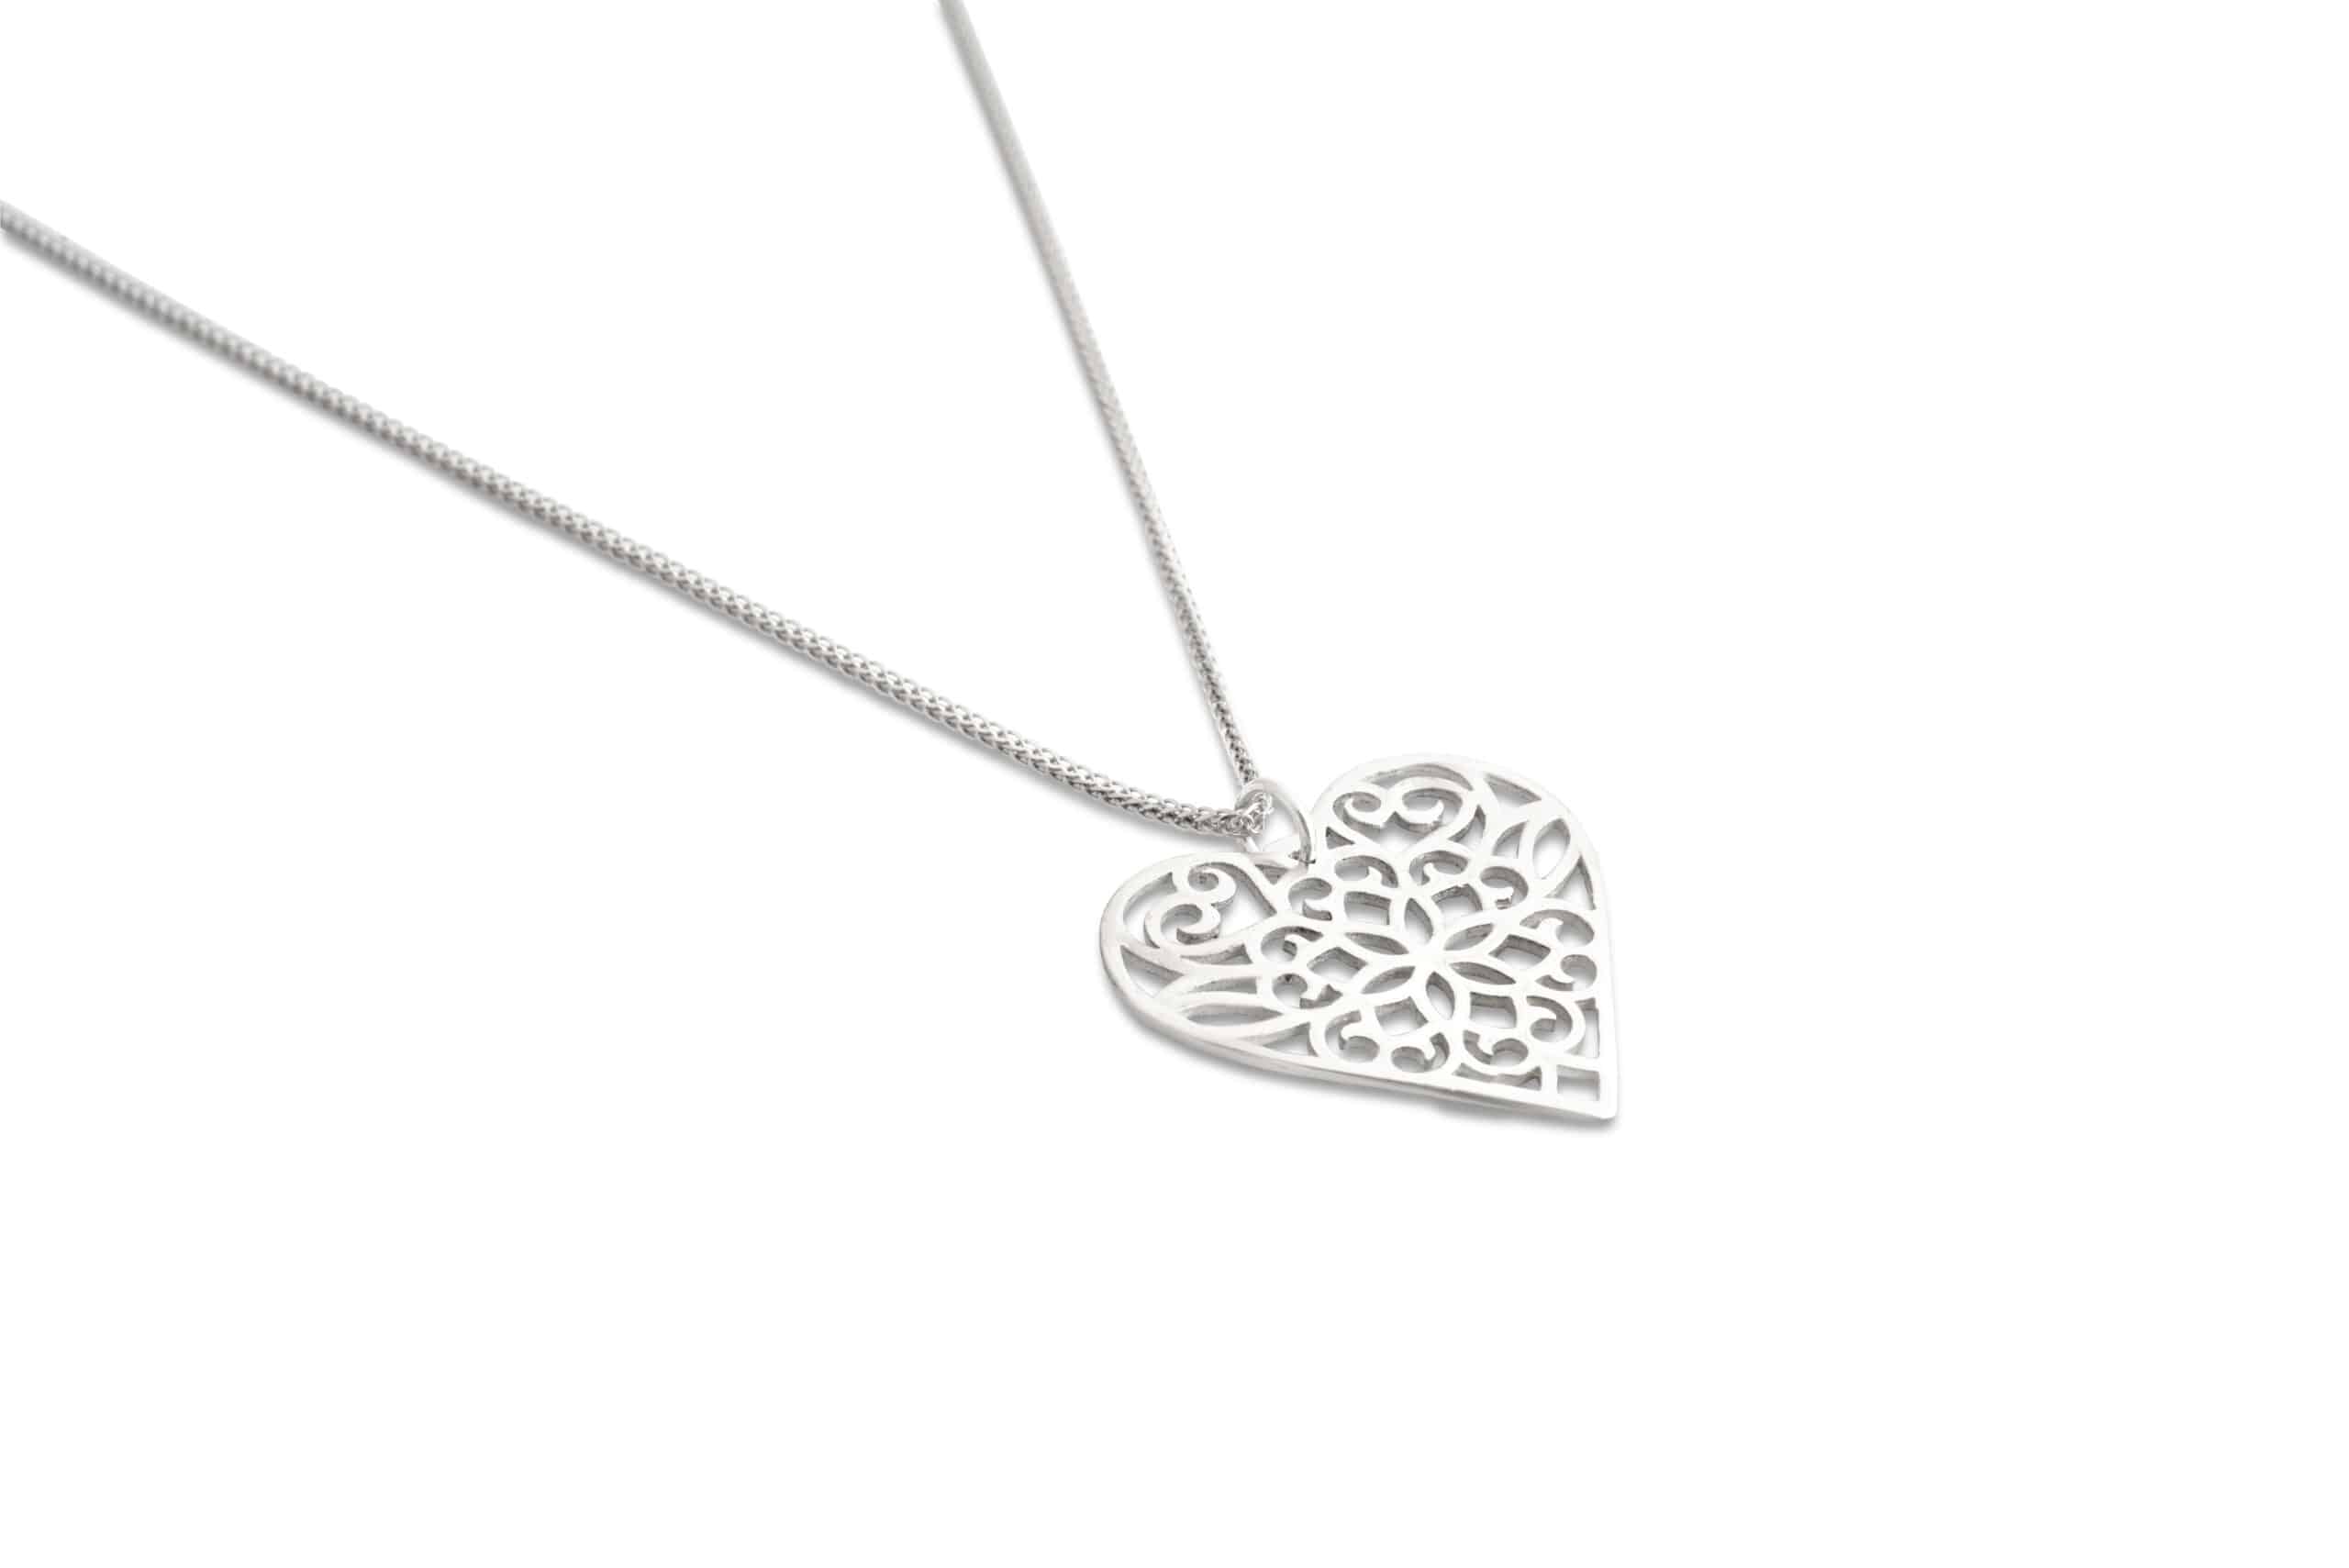 Sterling Silver Heart Filigree Necklace